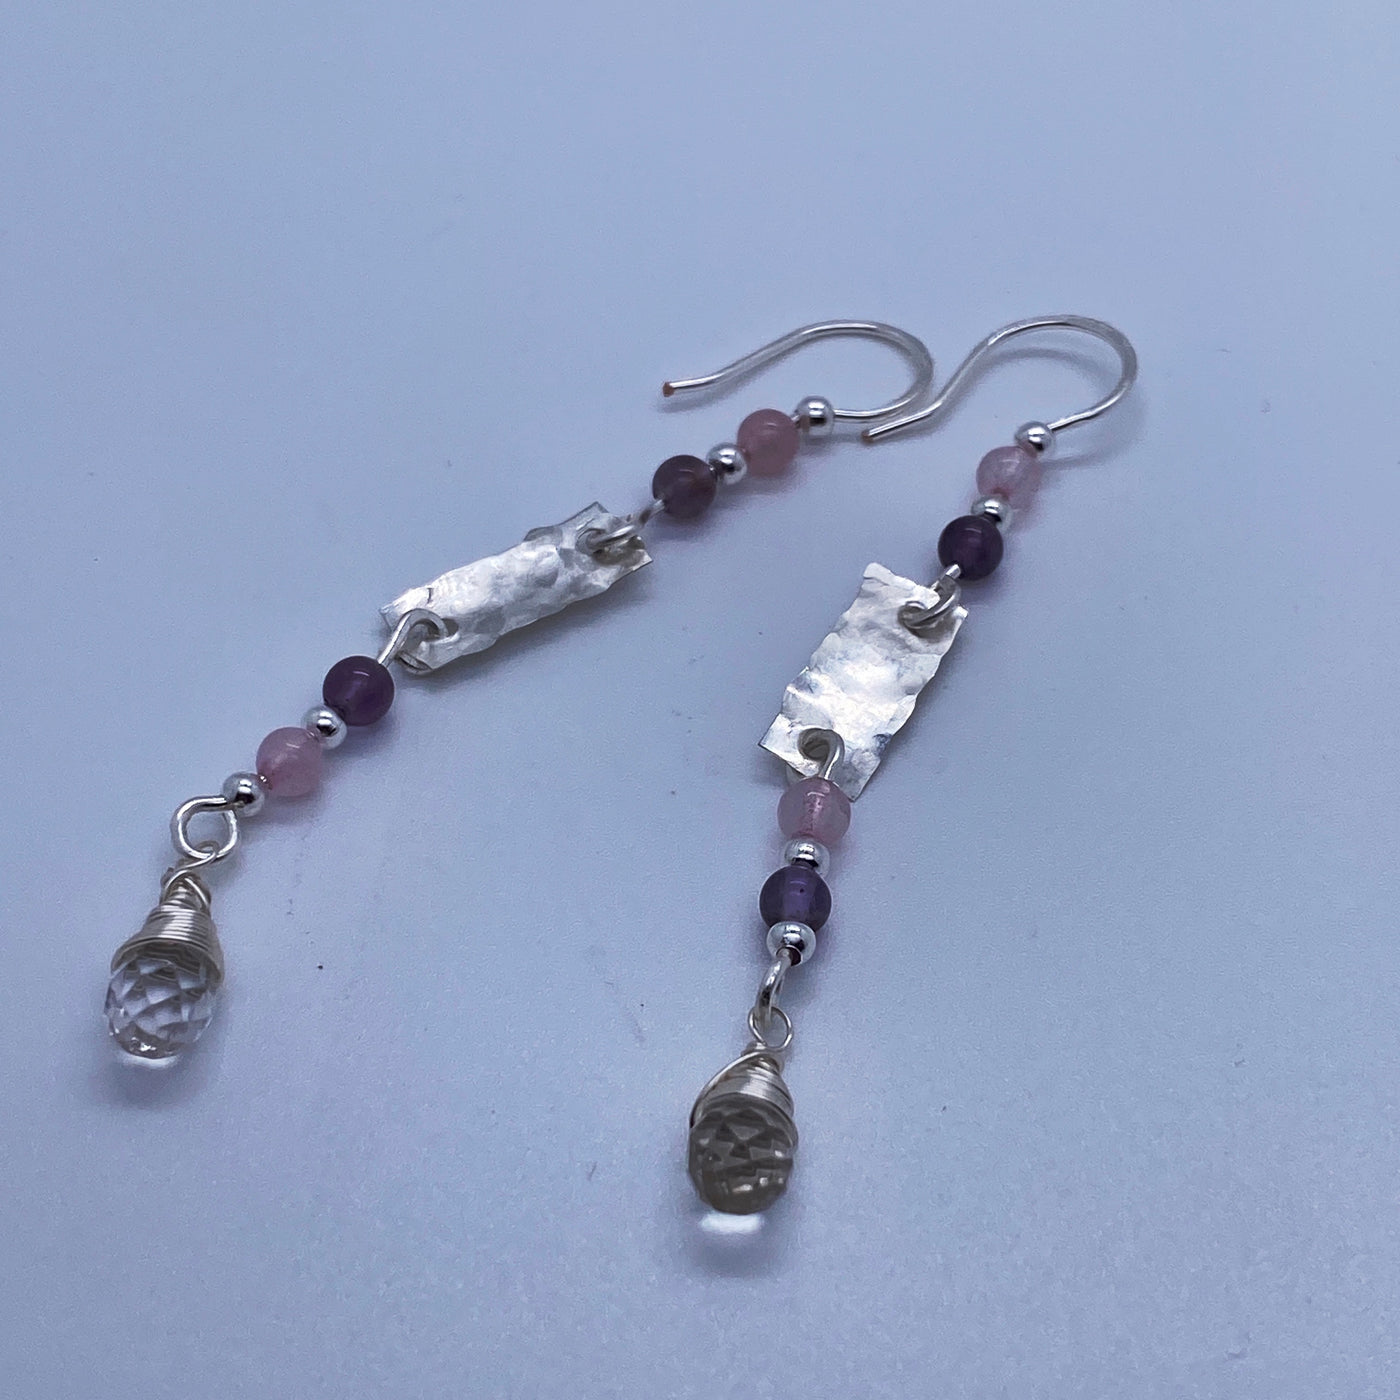 Silver earrings with amethyst, rose quartz and Chrystal briolette.